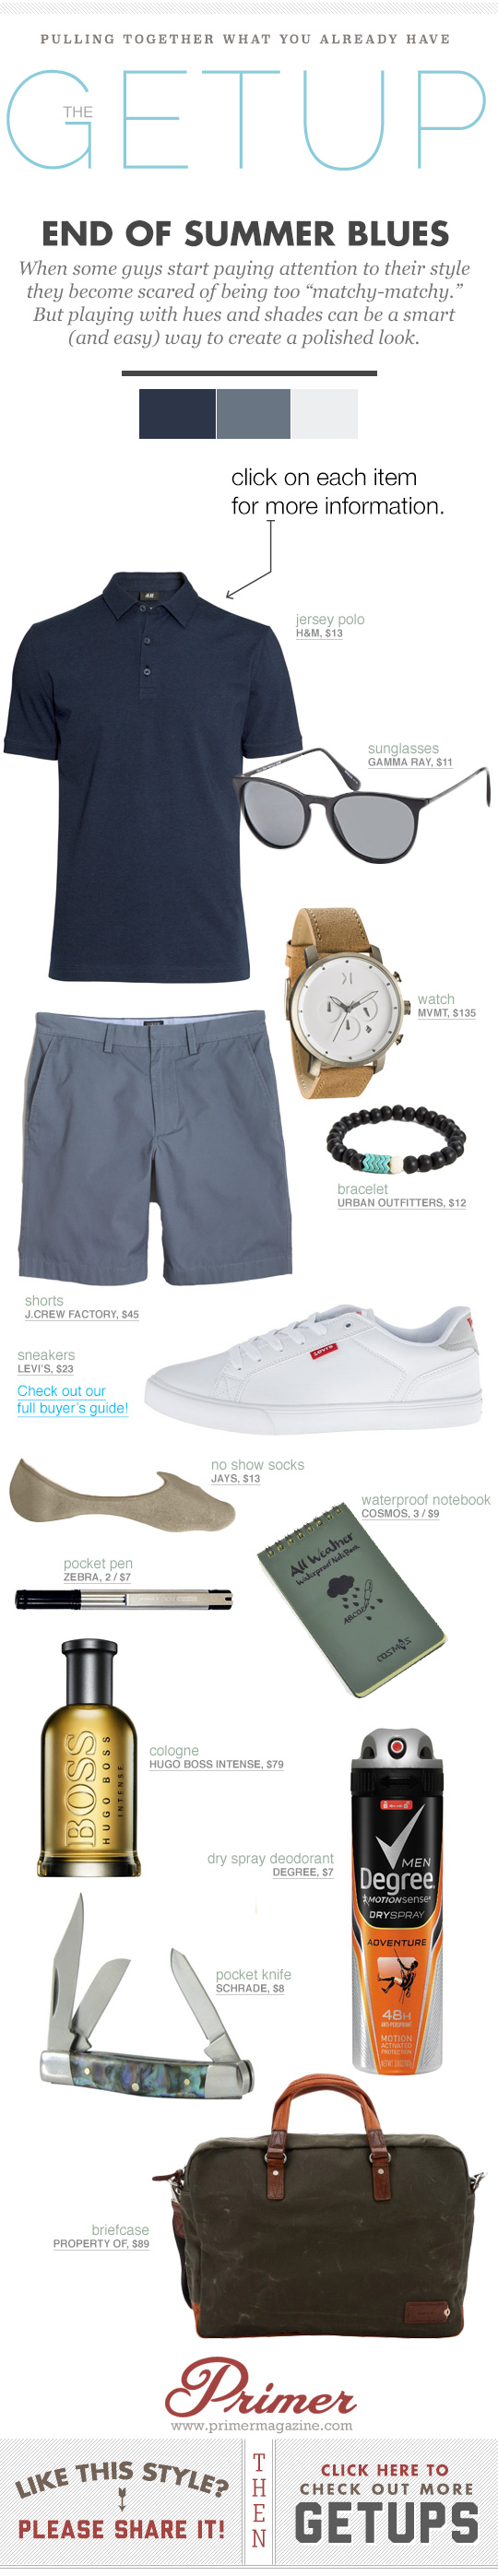 End of Summer Blues Getup - Polo and shorts with white sneakers outfit idea